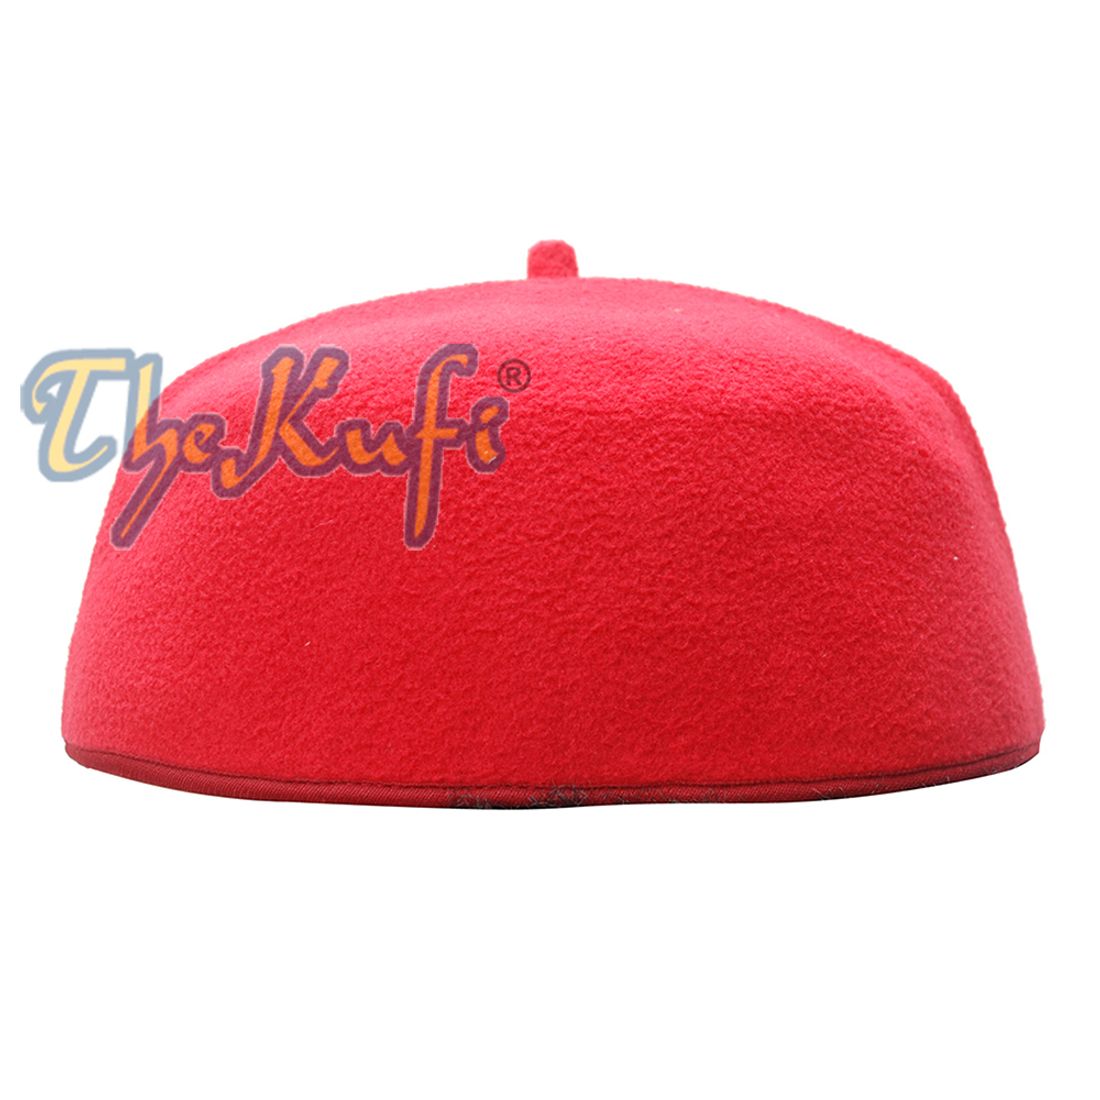 Handmade Red Fez-style Kufi with Tip